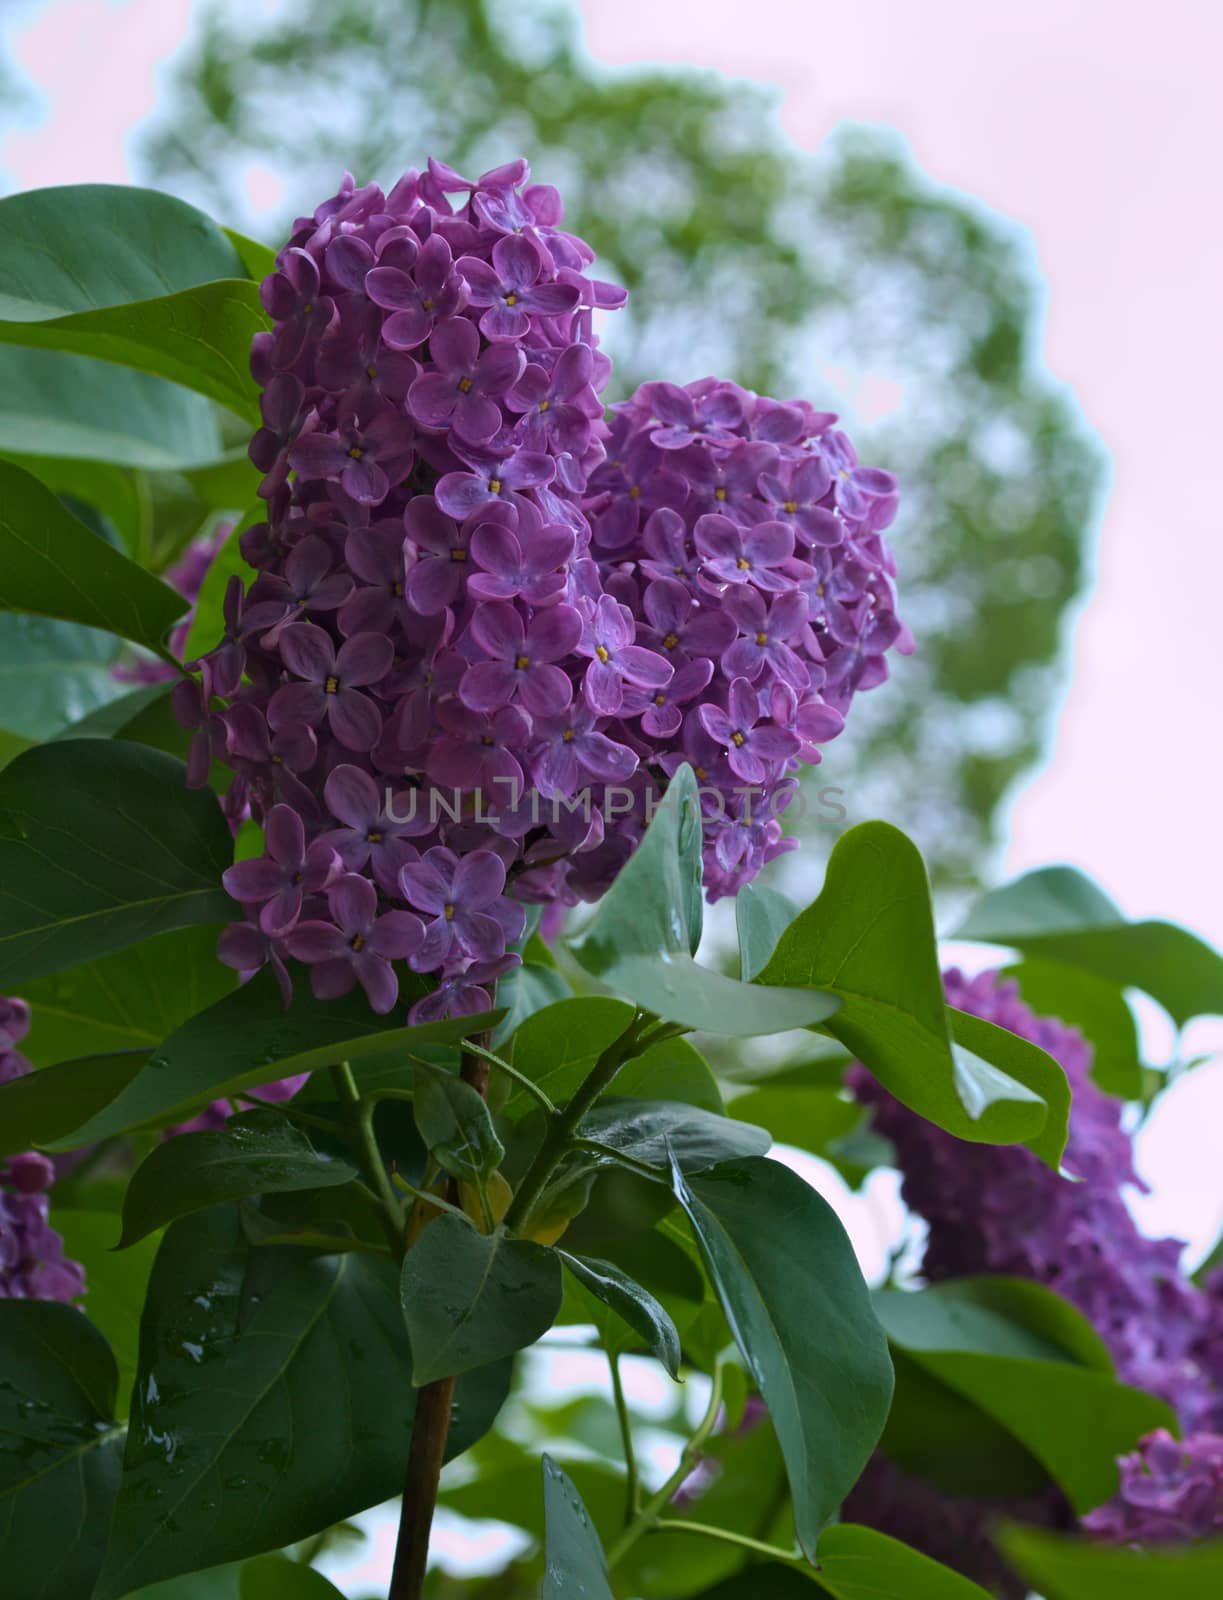 Lilac blooming flowers at spring time, closeup